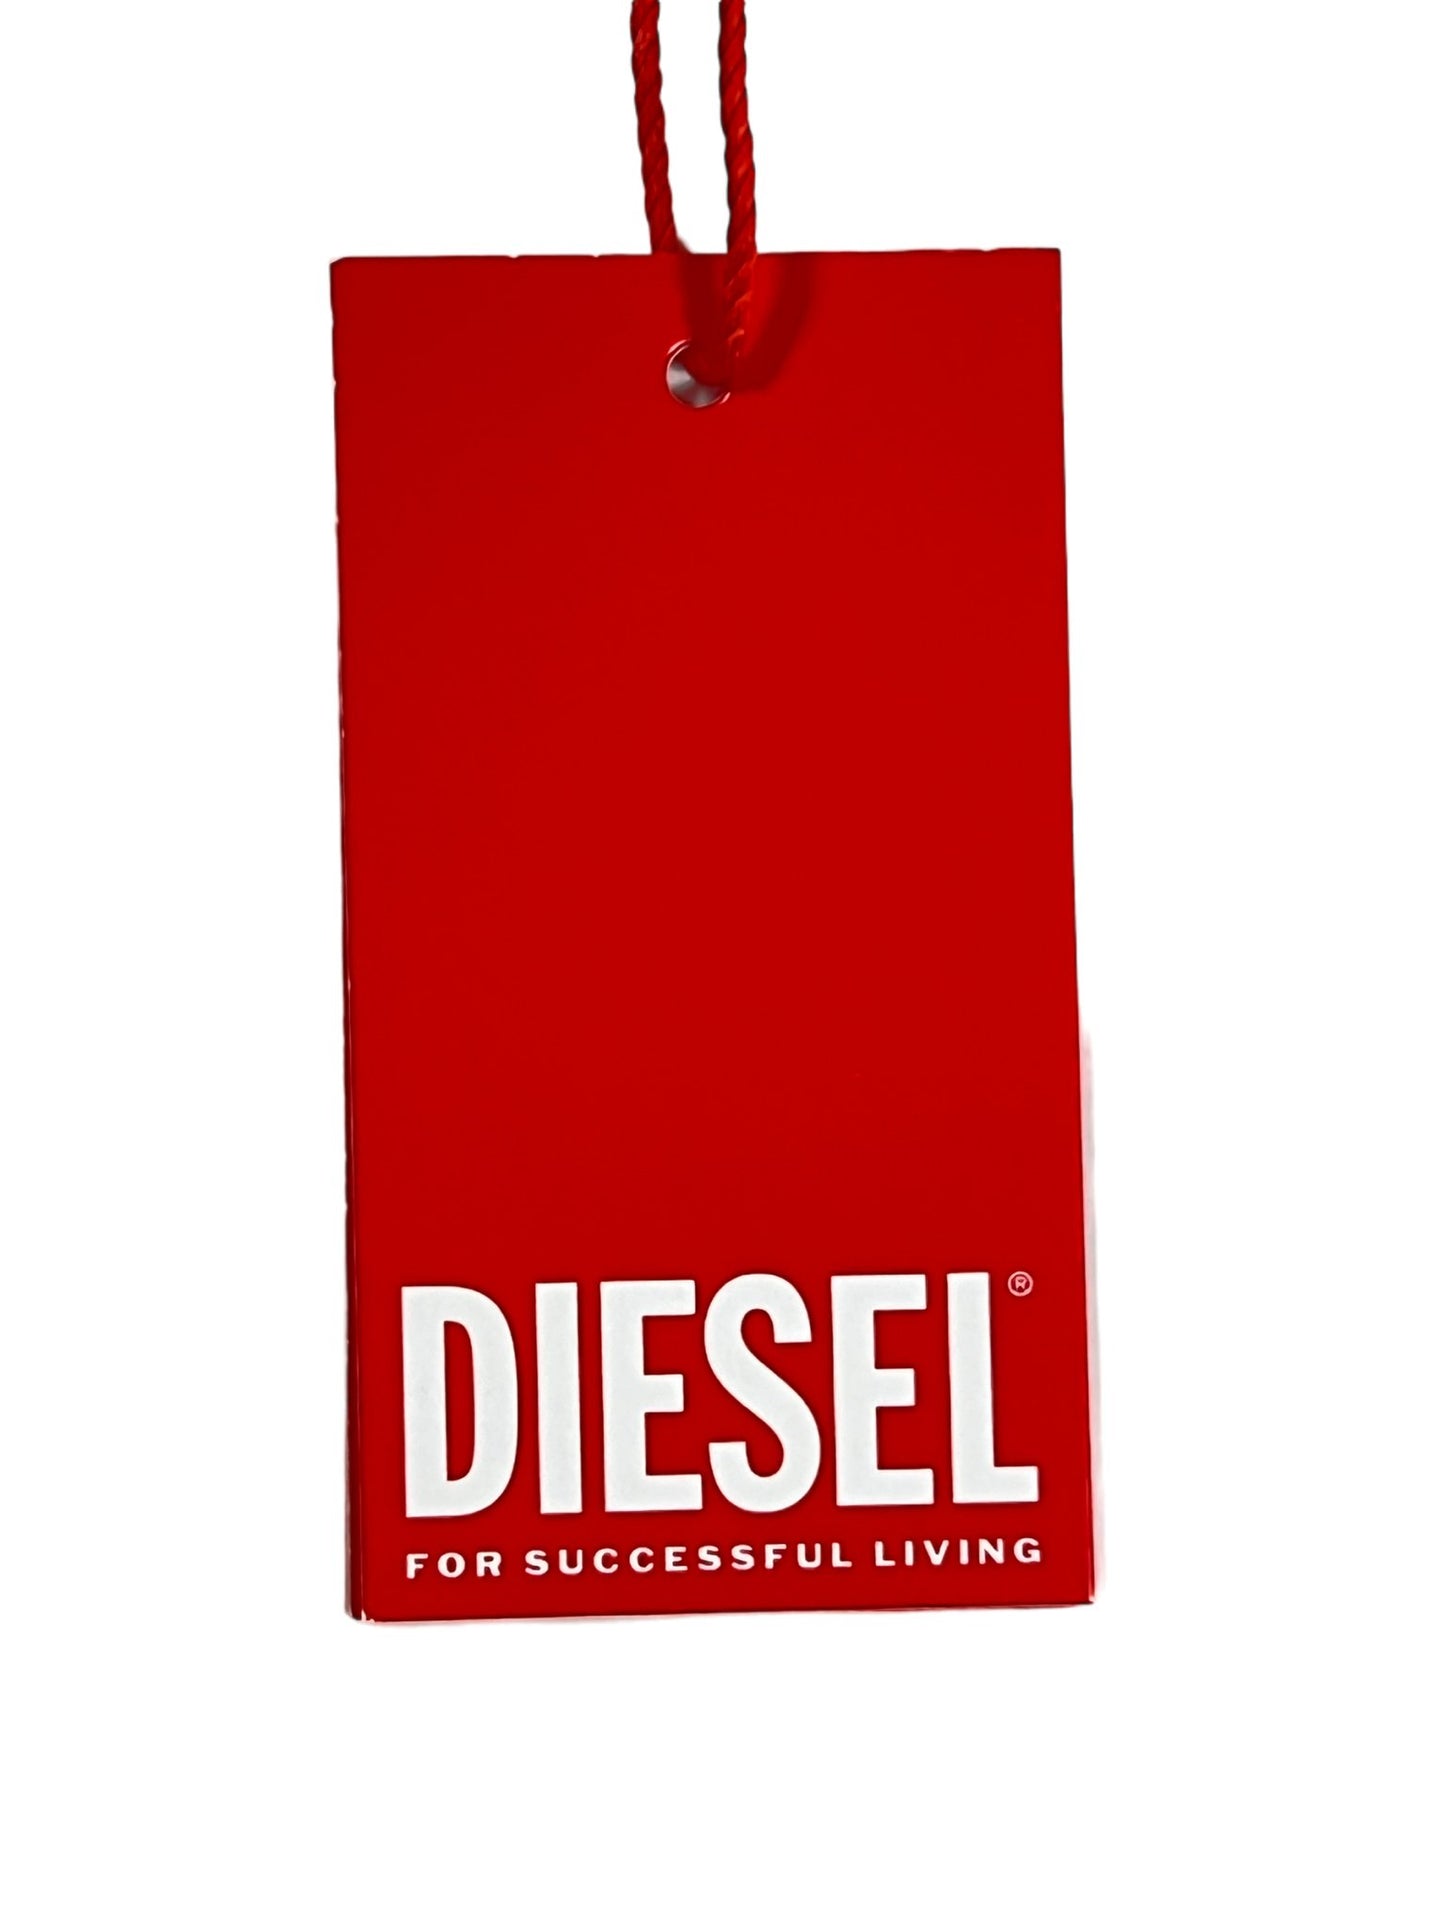 Red DIESEL T-RUST t-shirt brand tag with the slogan "for successful living" on a white background, emphasizing style and comfort.